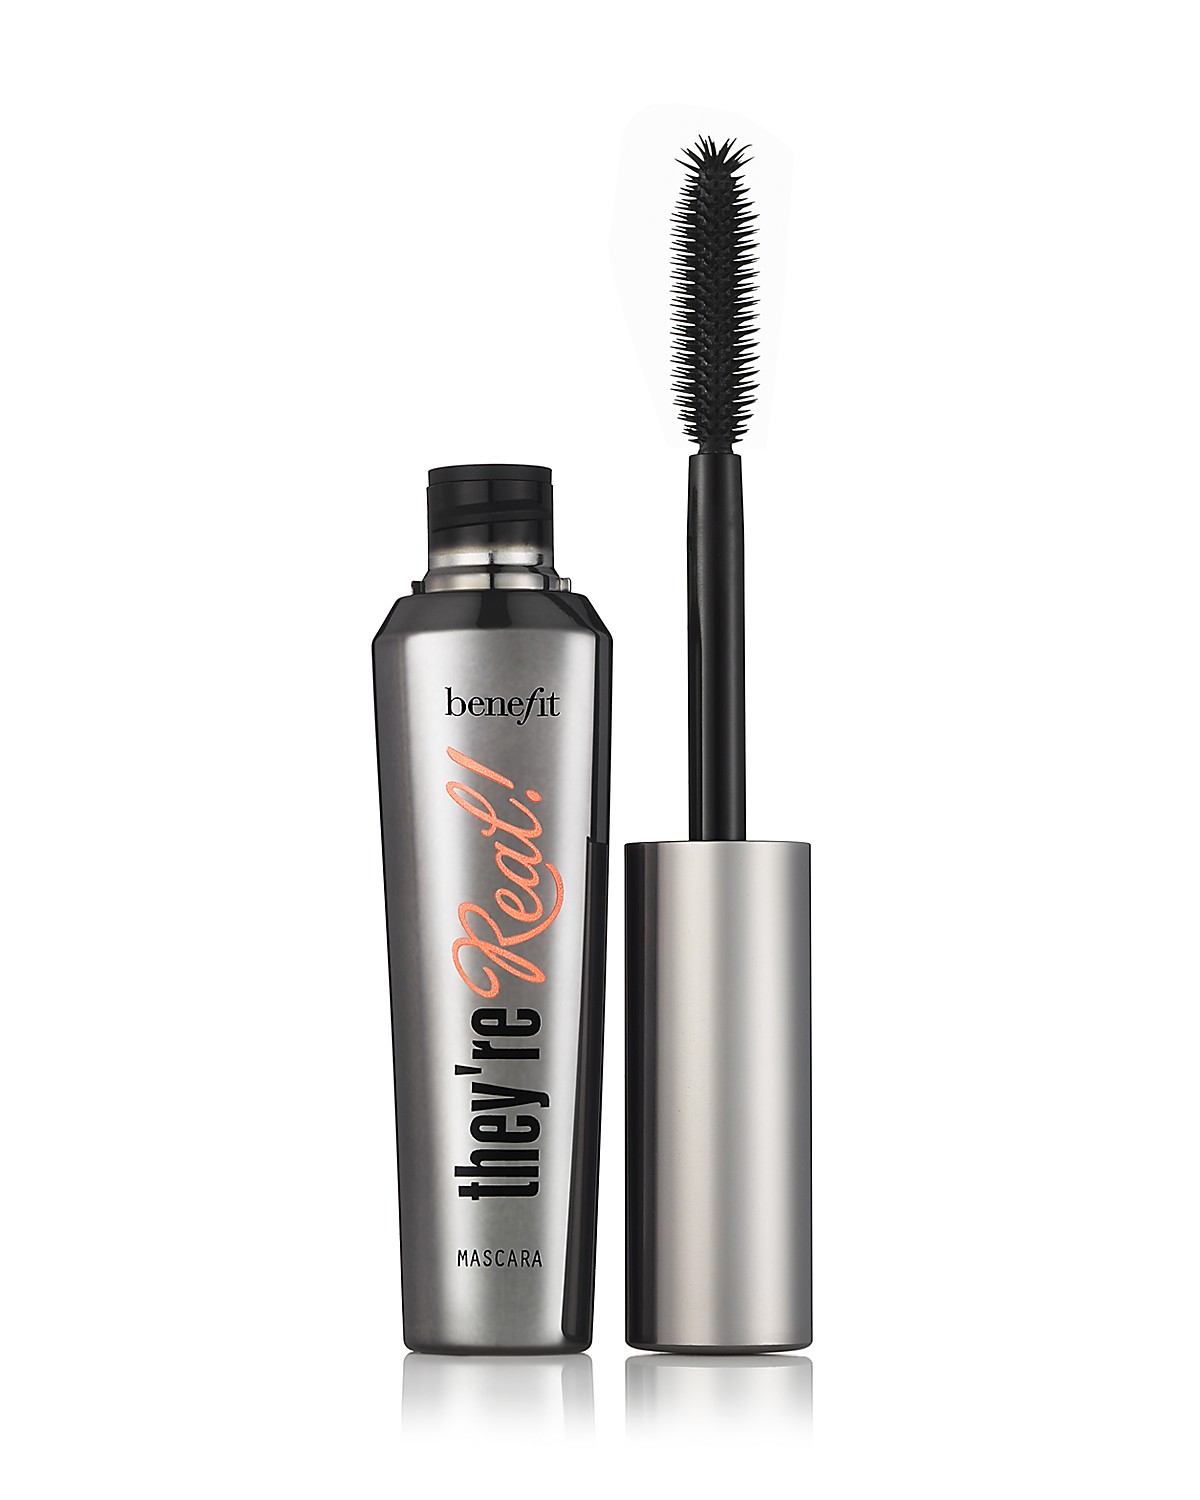 They're real mascara Benefit